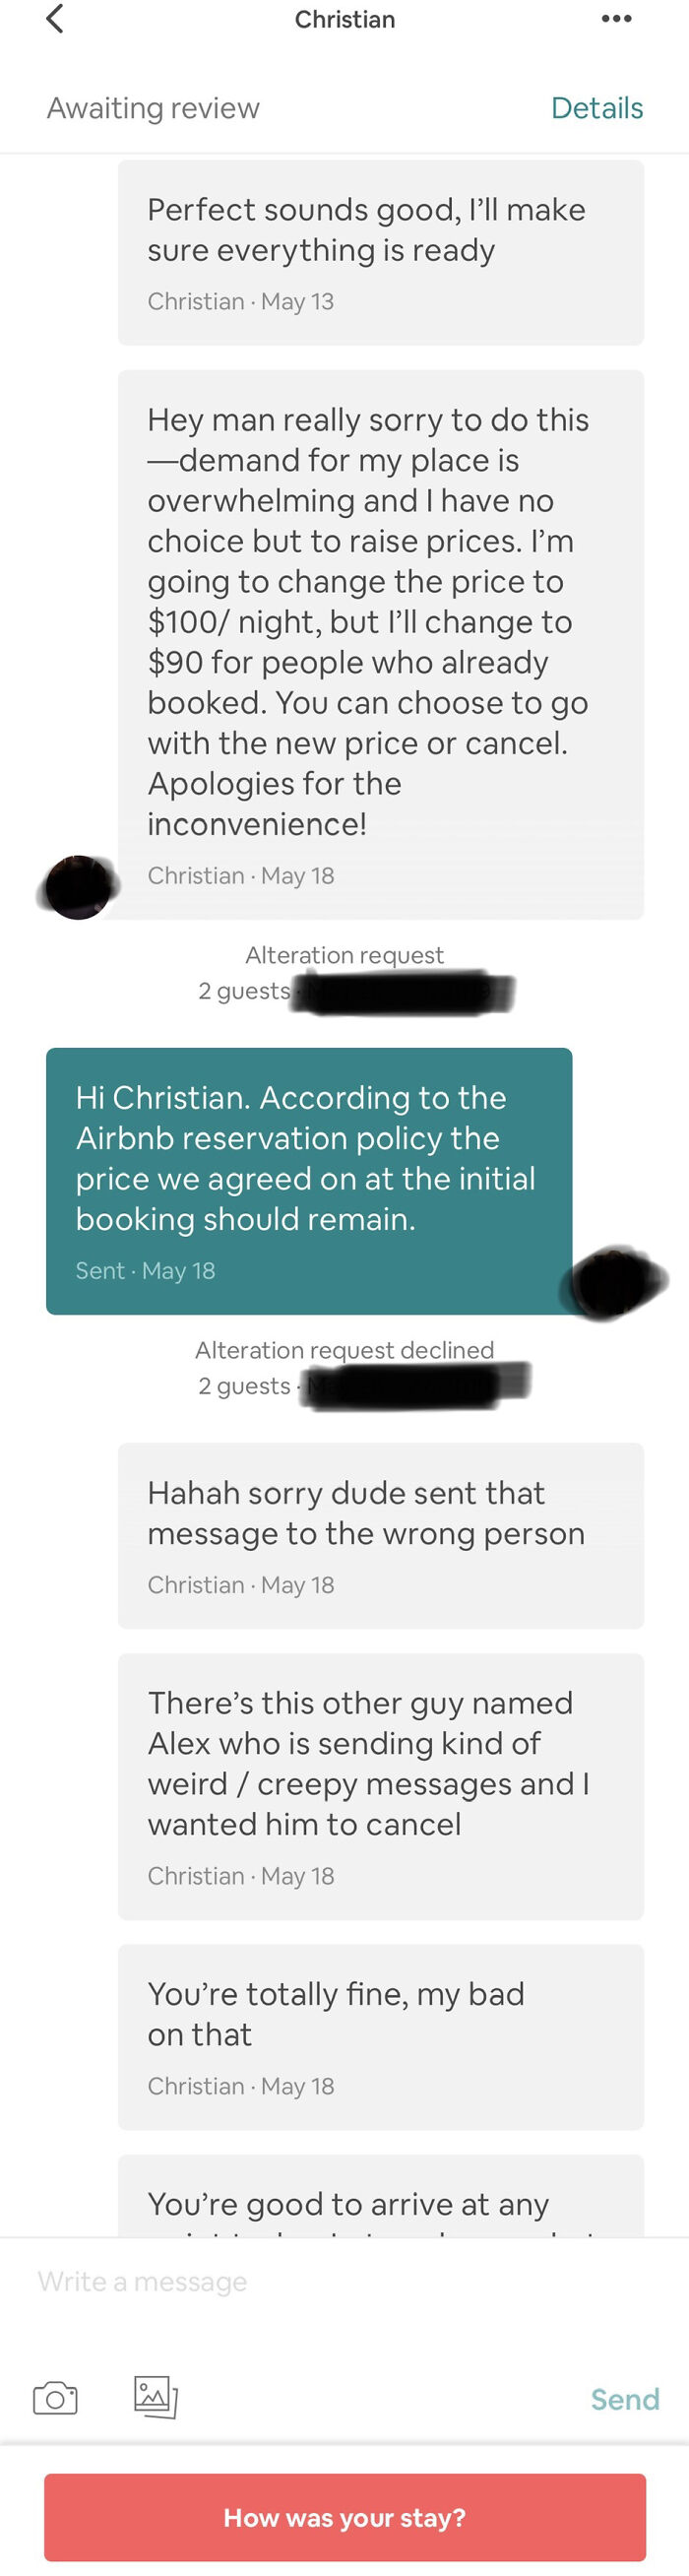 Airbnb Host Tried To Double The Price